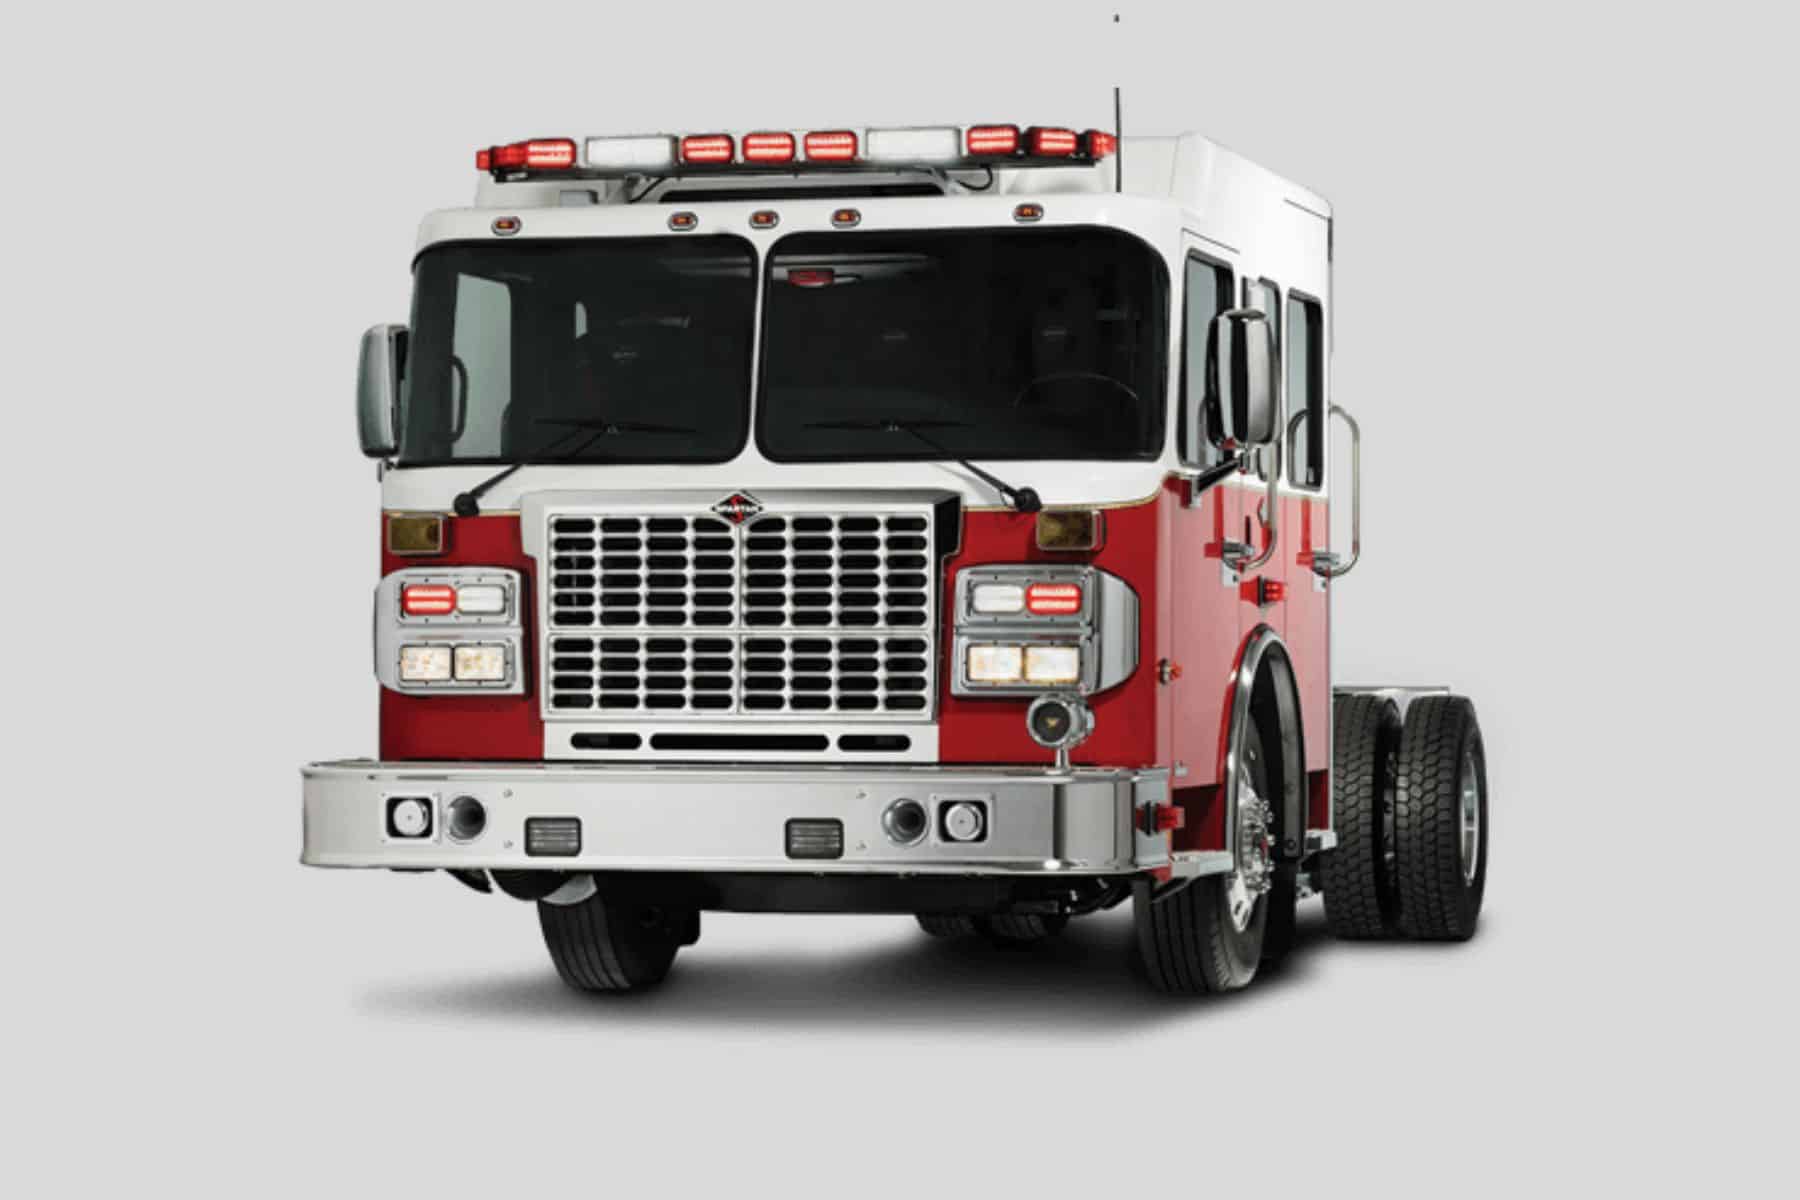 Emergency Vehicles Recalled for Faulty Parking Brake